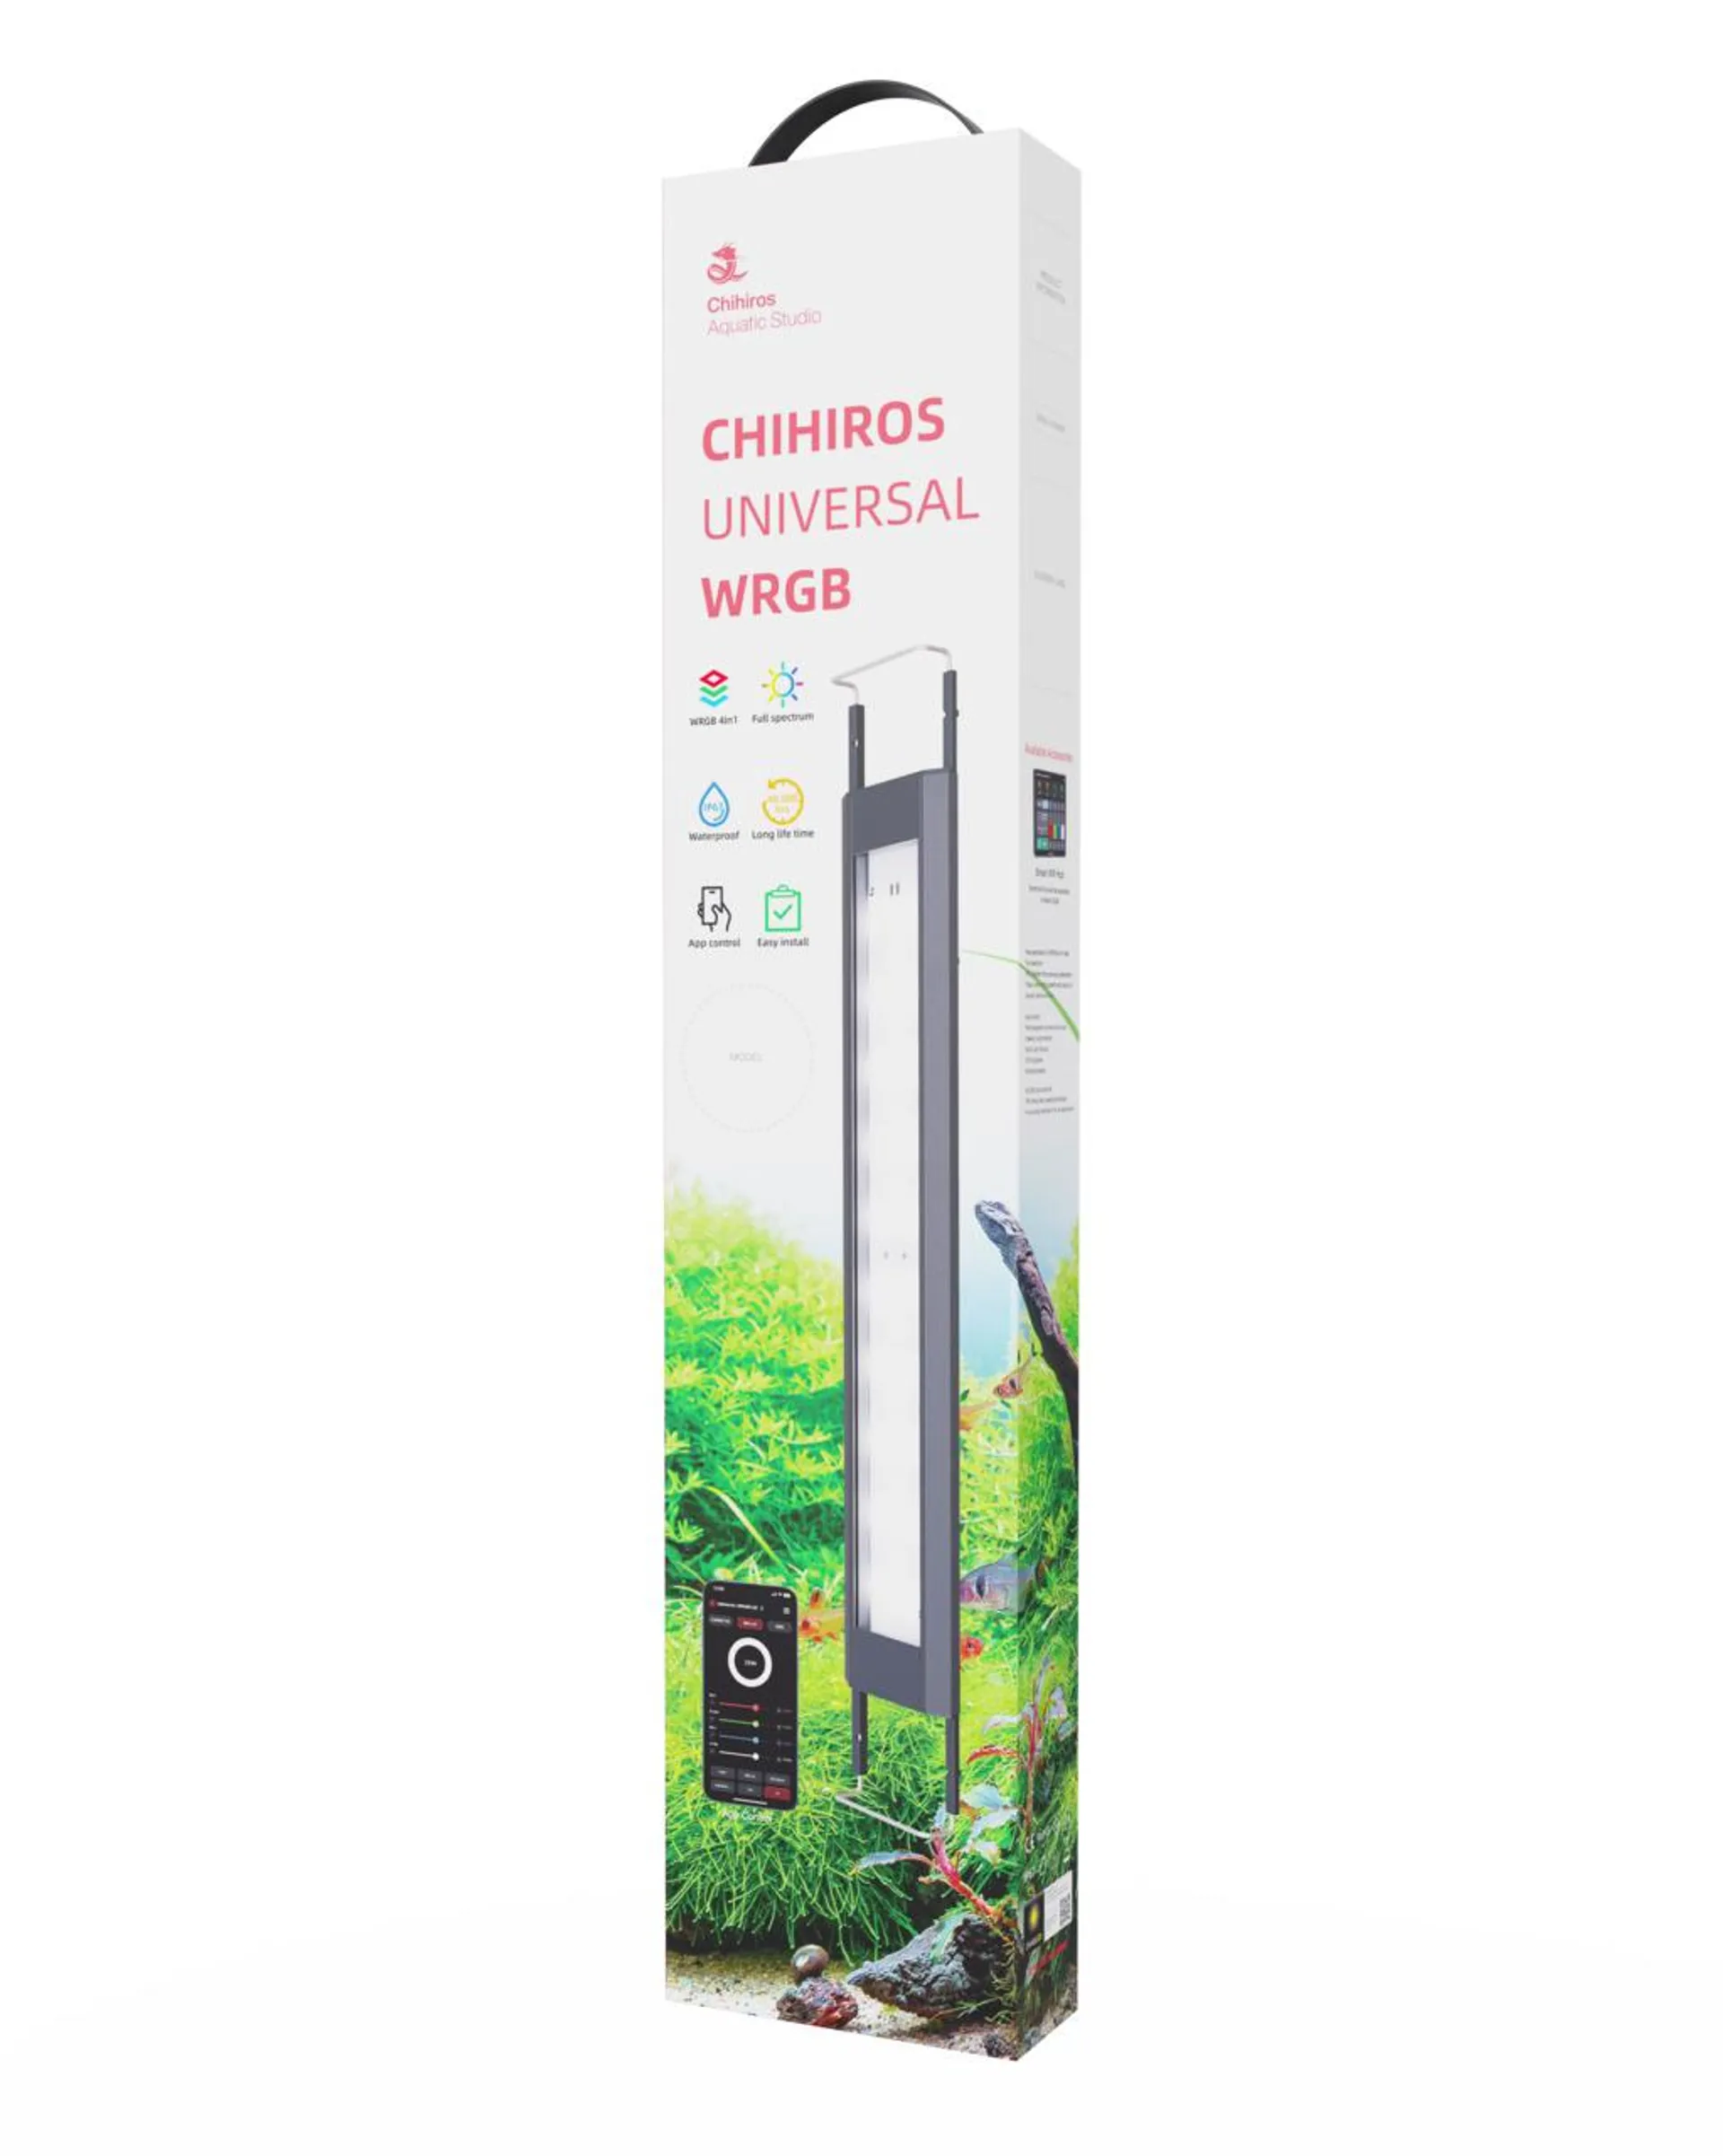 Chihiros Universal WRGB 550 inkl. Controller